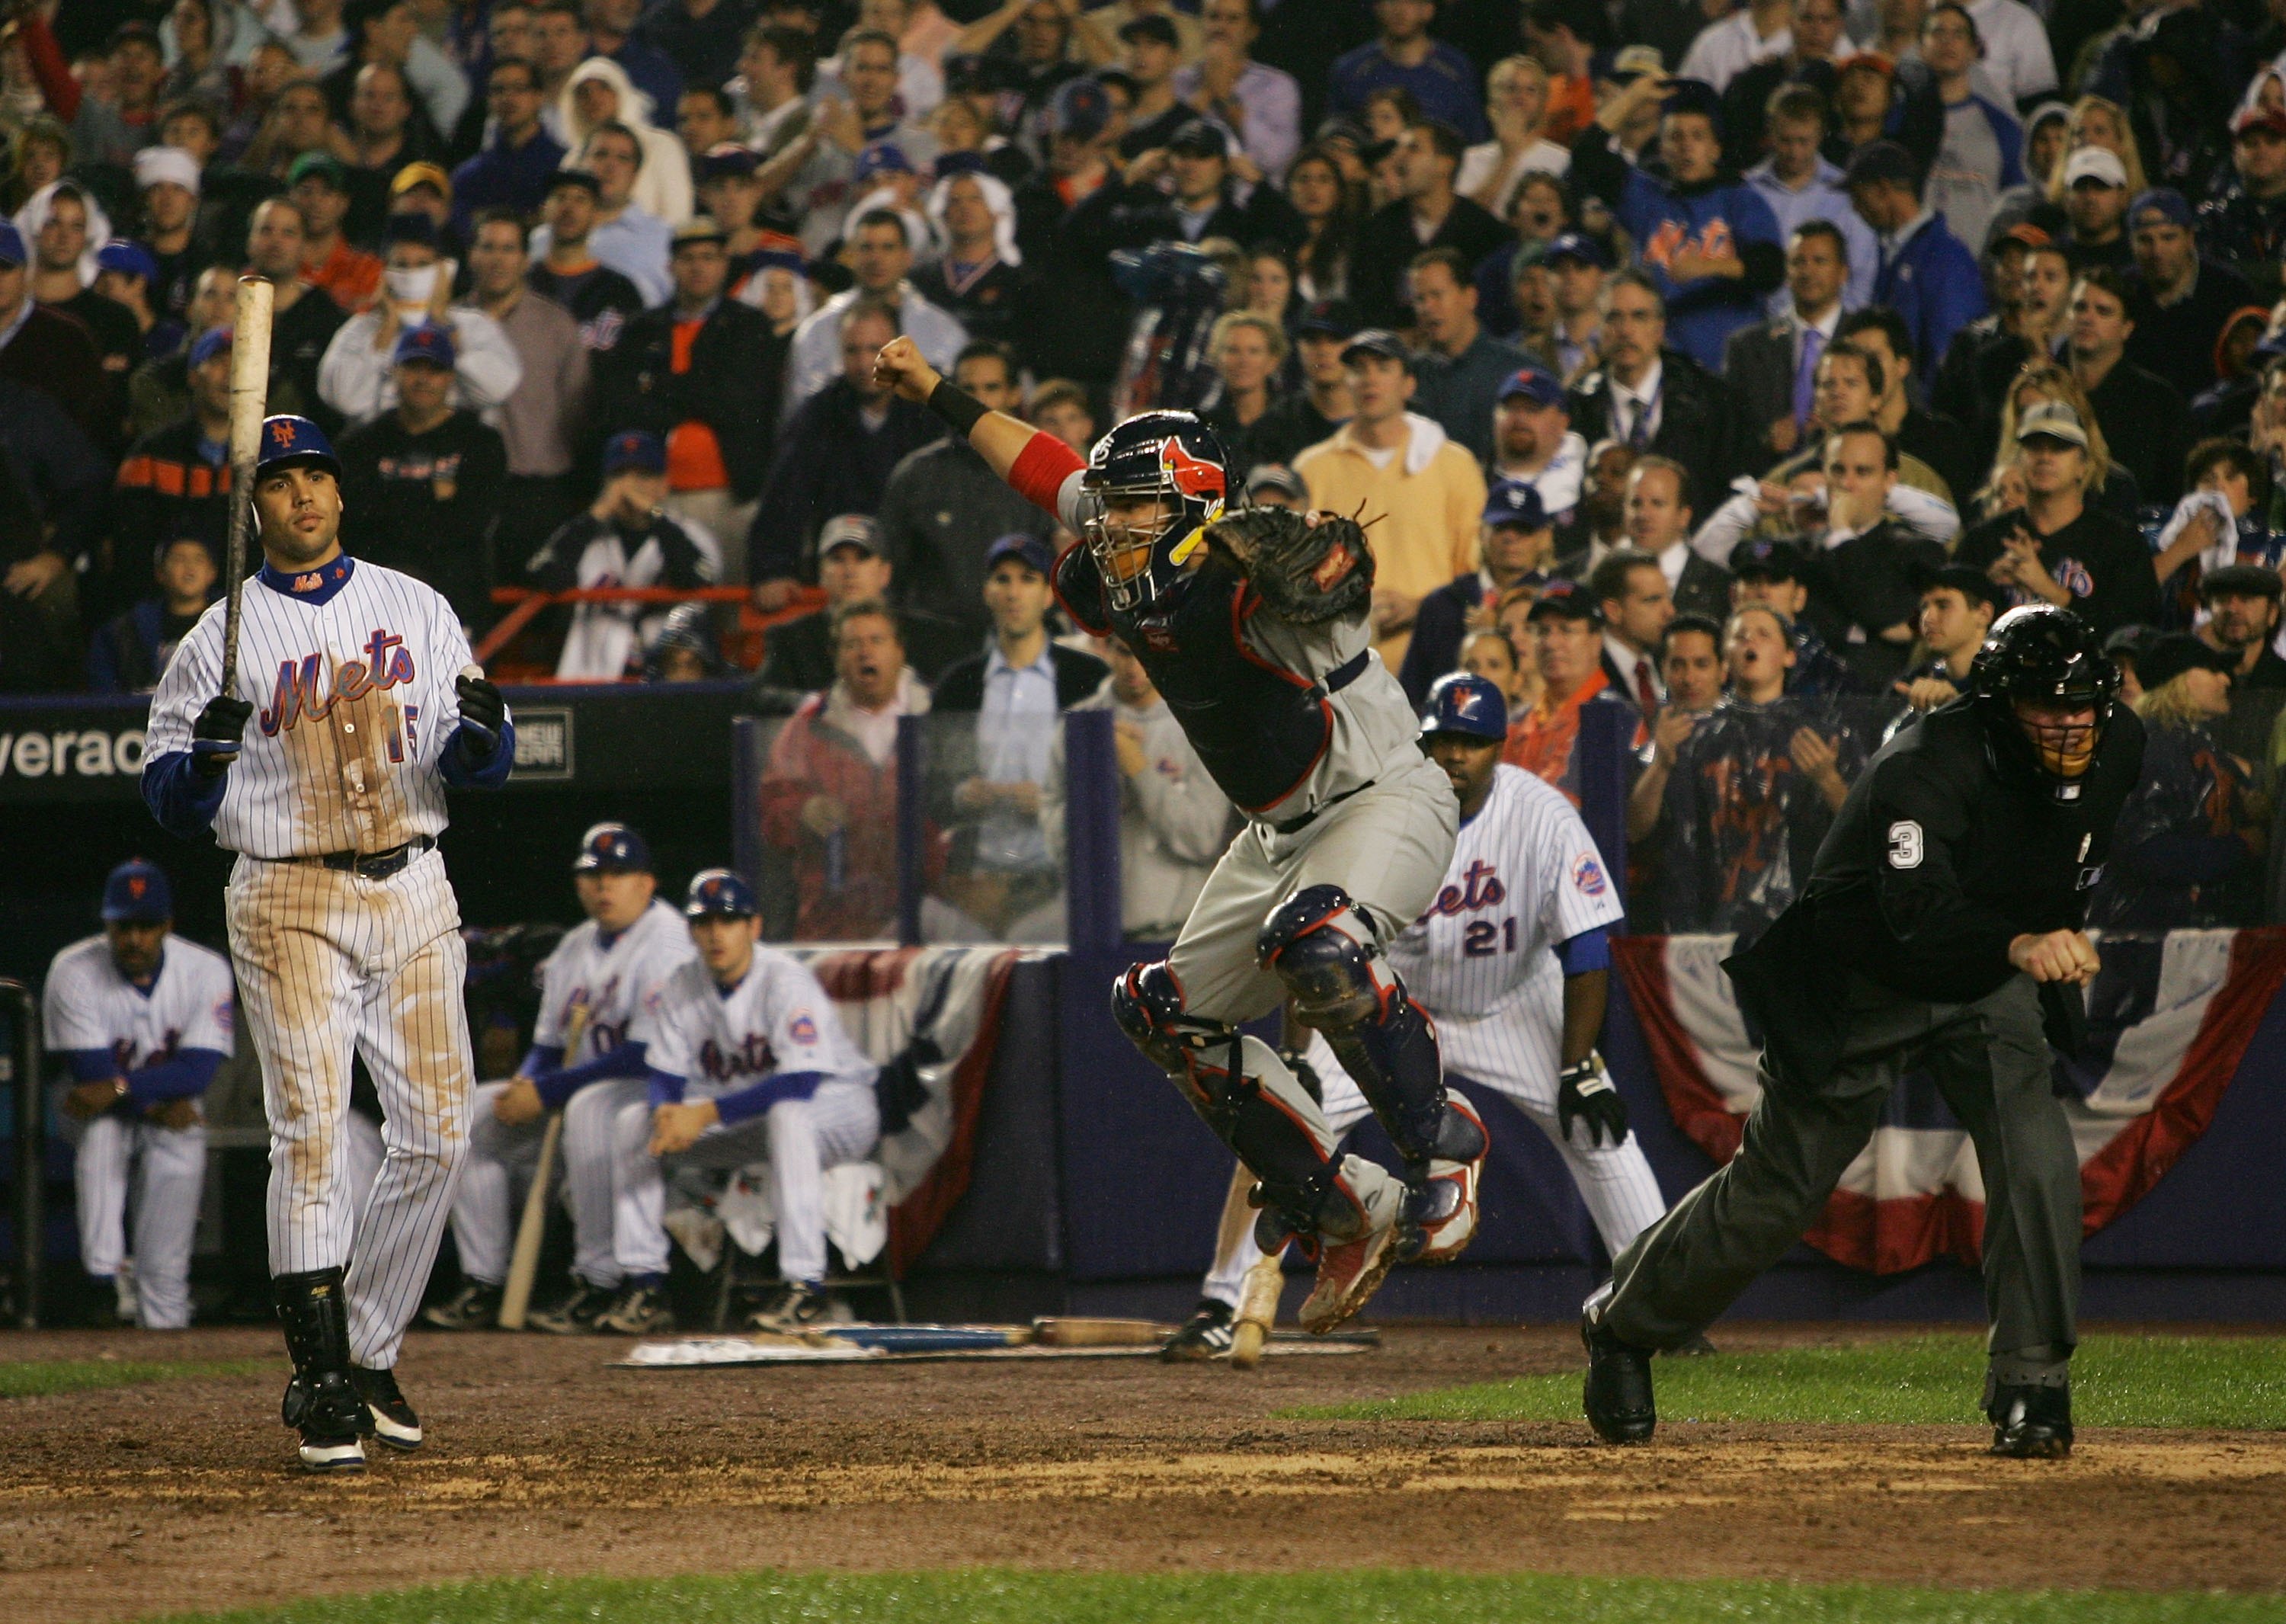 NEW YORK - OCTOBER 19:  Catcher Yadier Molina #4 of the St. Louis Cardinals reacts after Carlos Beltran #15 of the New York Mets stikes out to end game seven of the NLCS at Shea Stadium on October 19, 2006 in the Flushing neighborhood of the Queens boroug